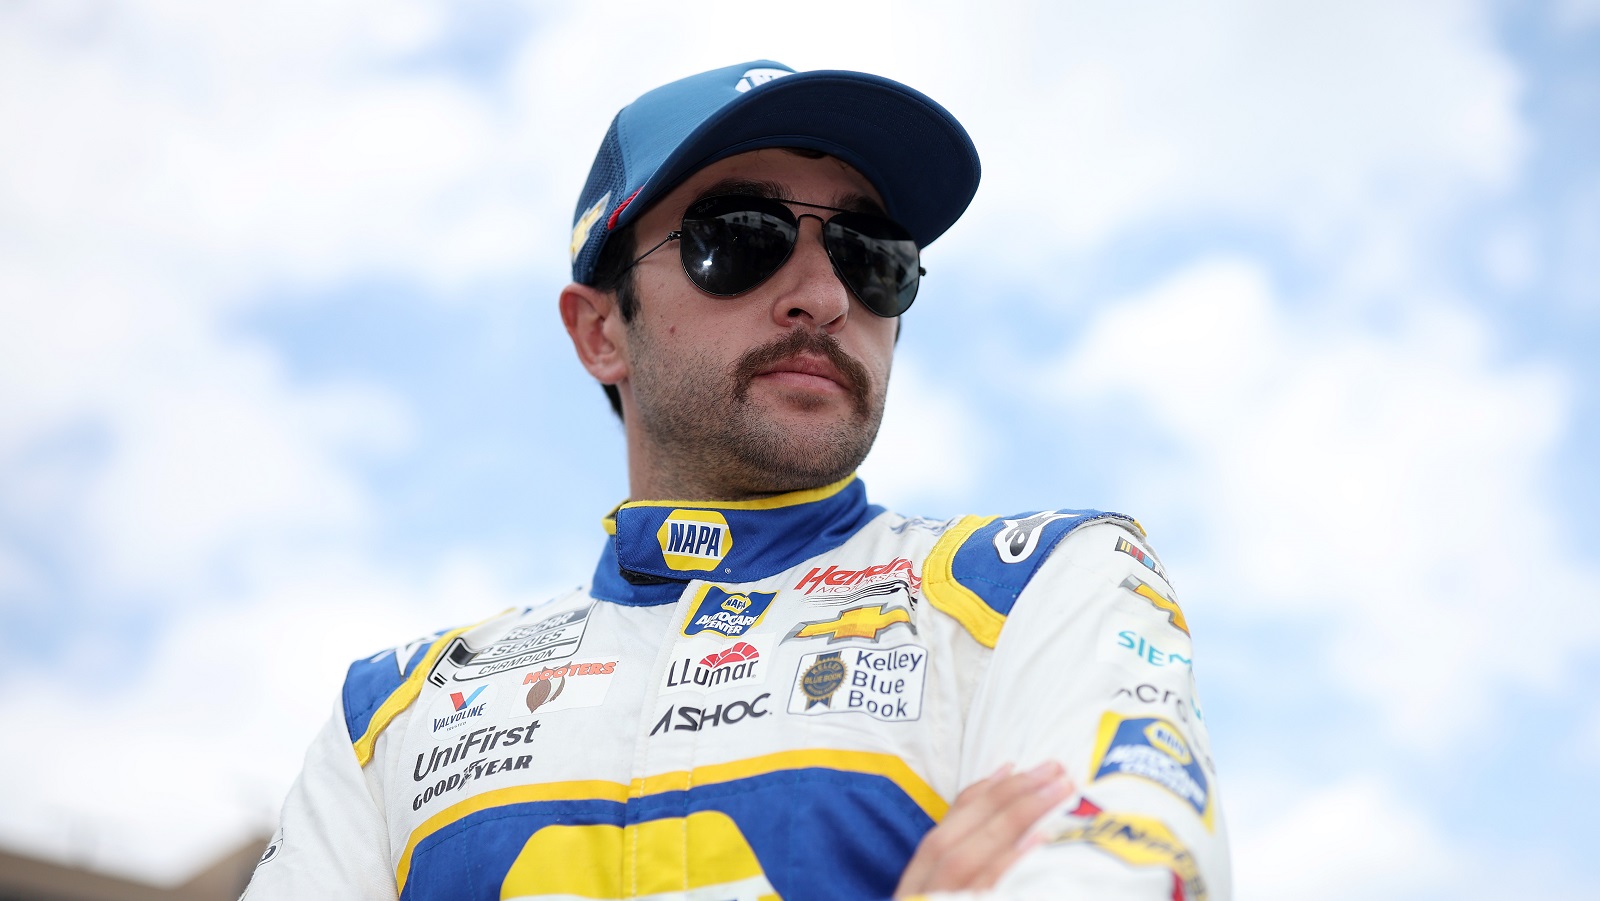 Chase Elliott waits on the grid prior to the NASCAR Cup Series Quaker State 400 at Atlanta Motor Speedway on July 10, 2022. | James Gilbert/Getty Images